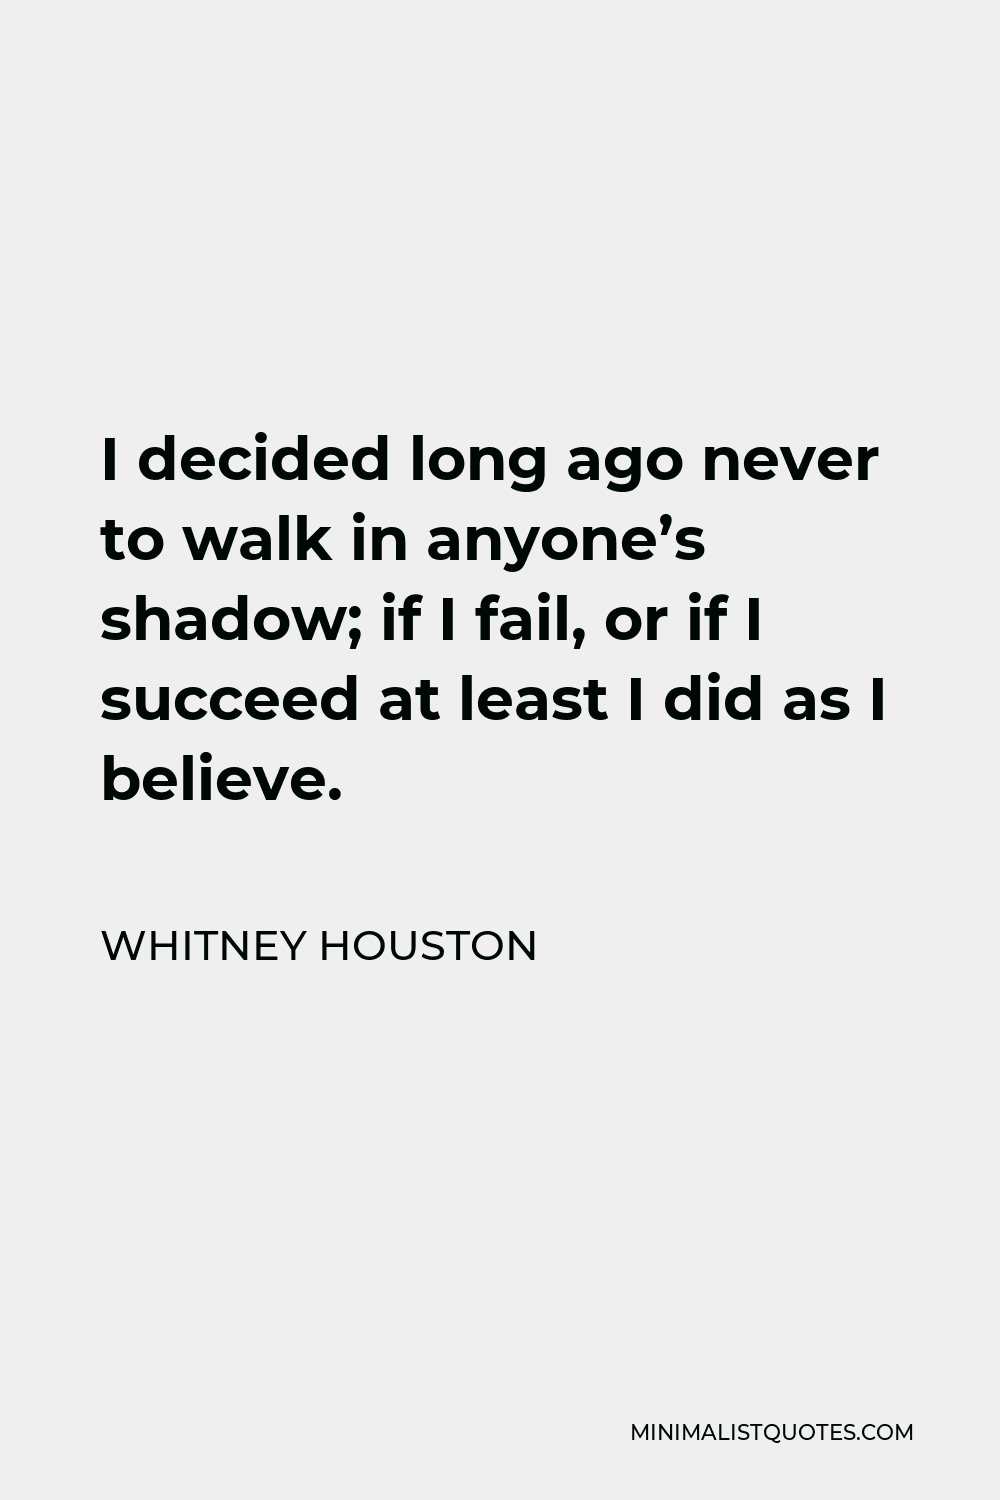 Whitney Houston Quote - I decided long ago never to walk in anyone’s shadow; if I fail, or if I succeed at least I did as I believe.